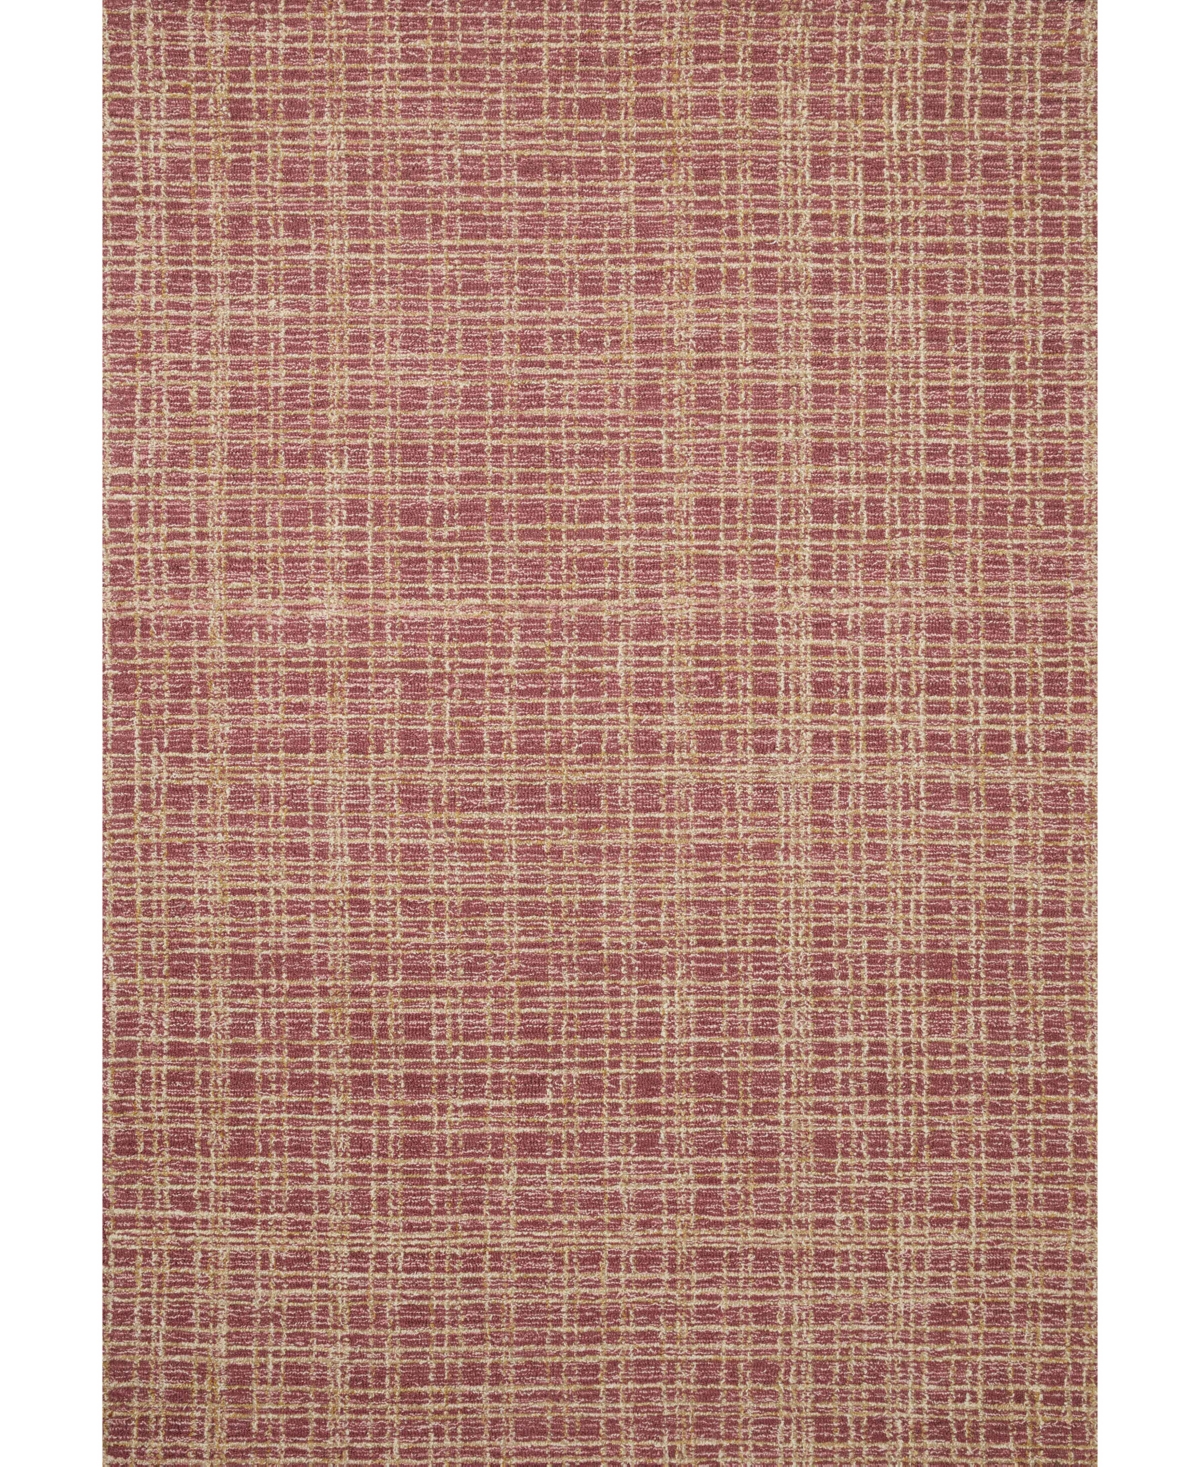 Chris Loves Julia Polly Pol-03 8'6in x 11'6in Area Rug - Cranberry